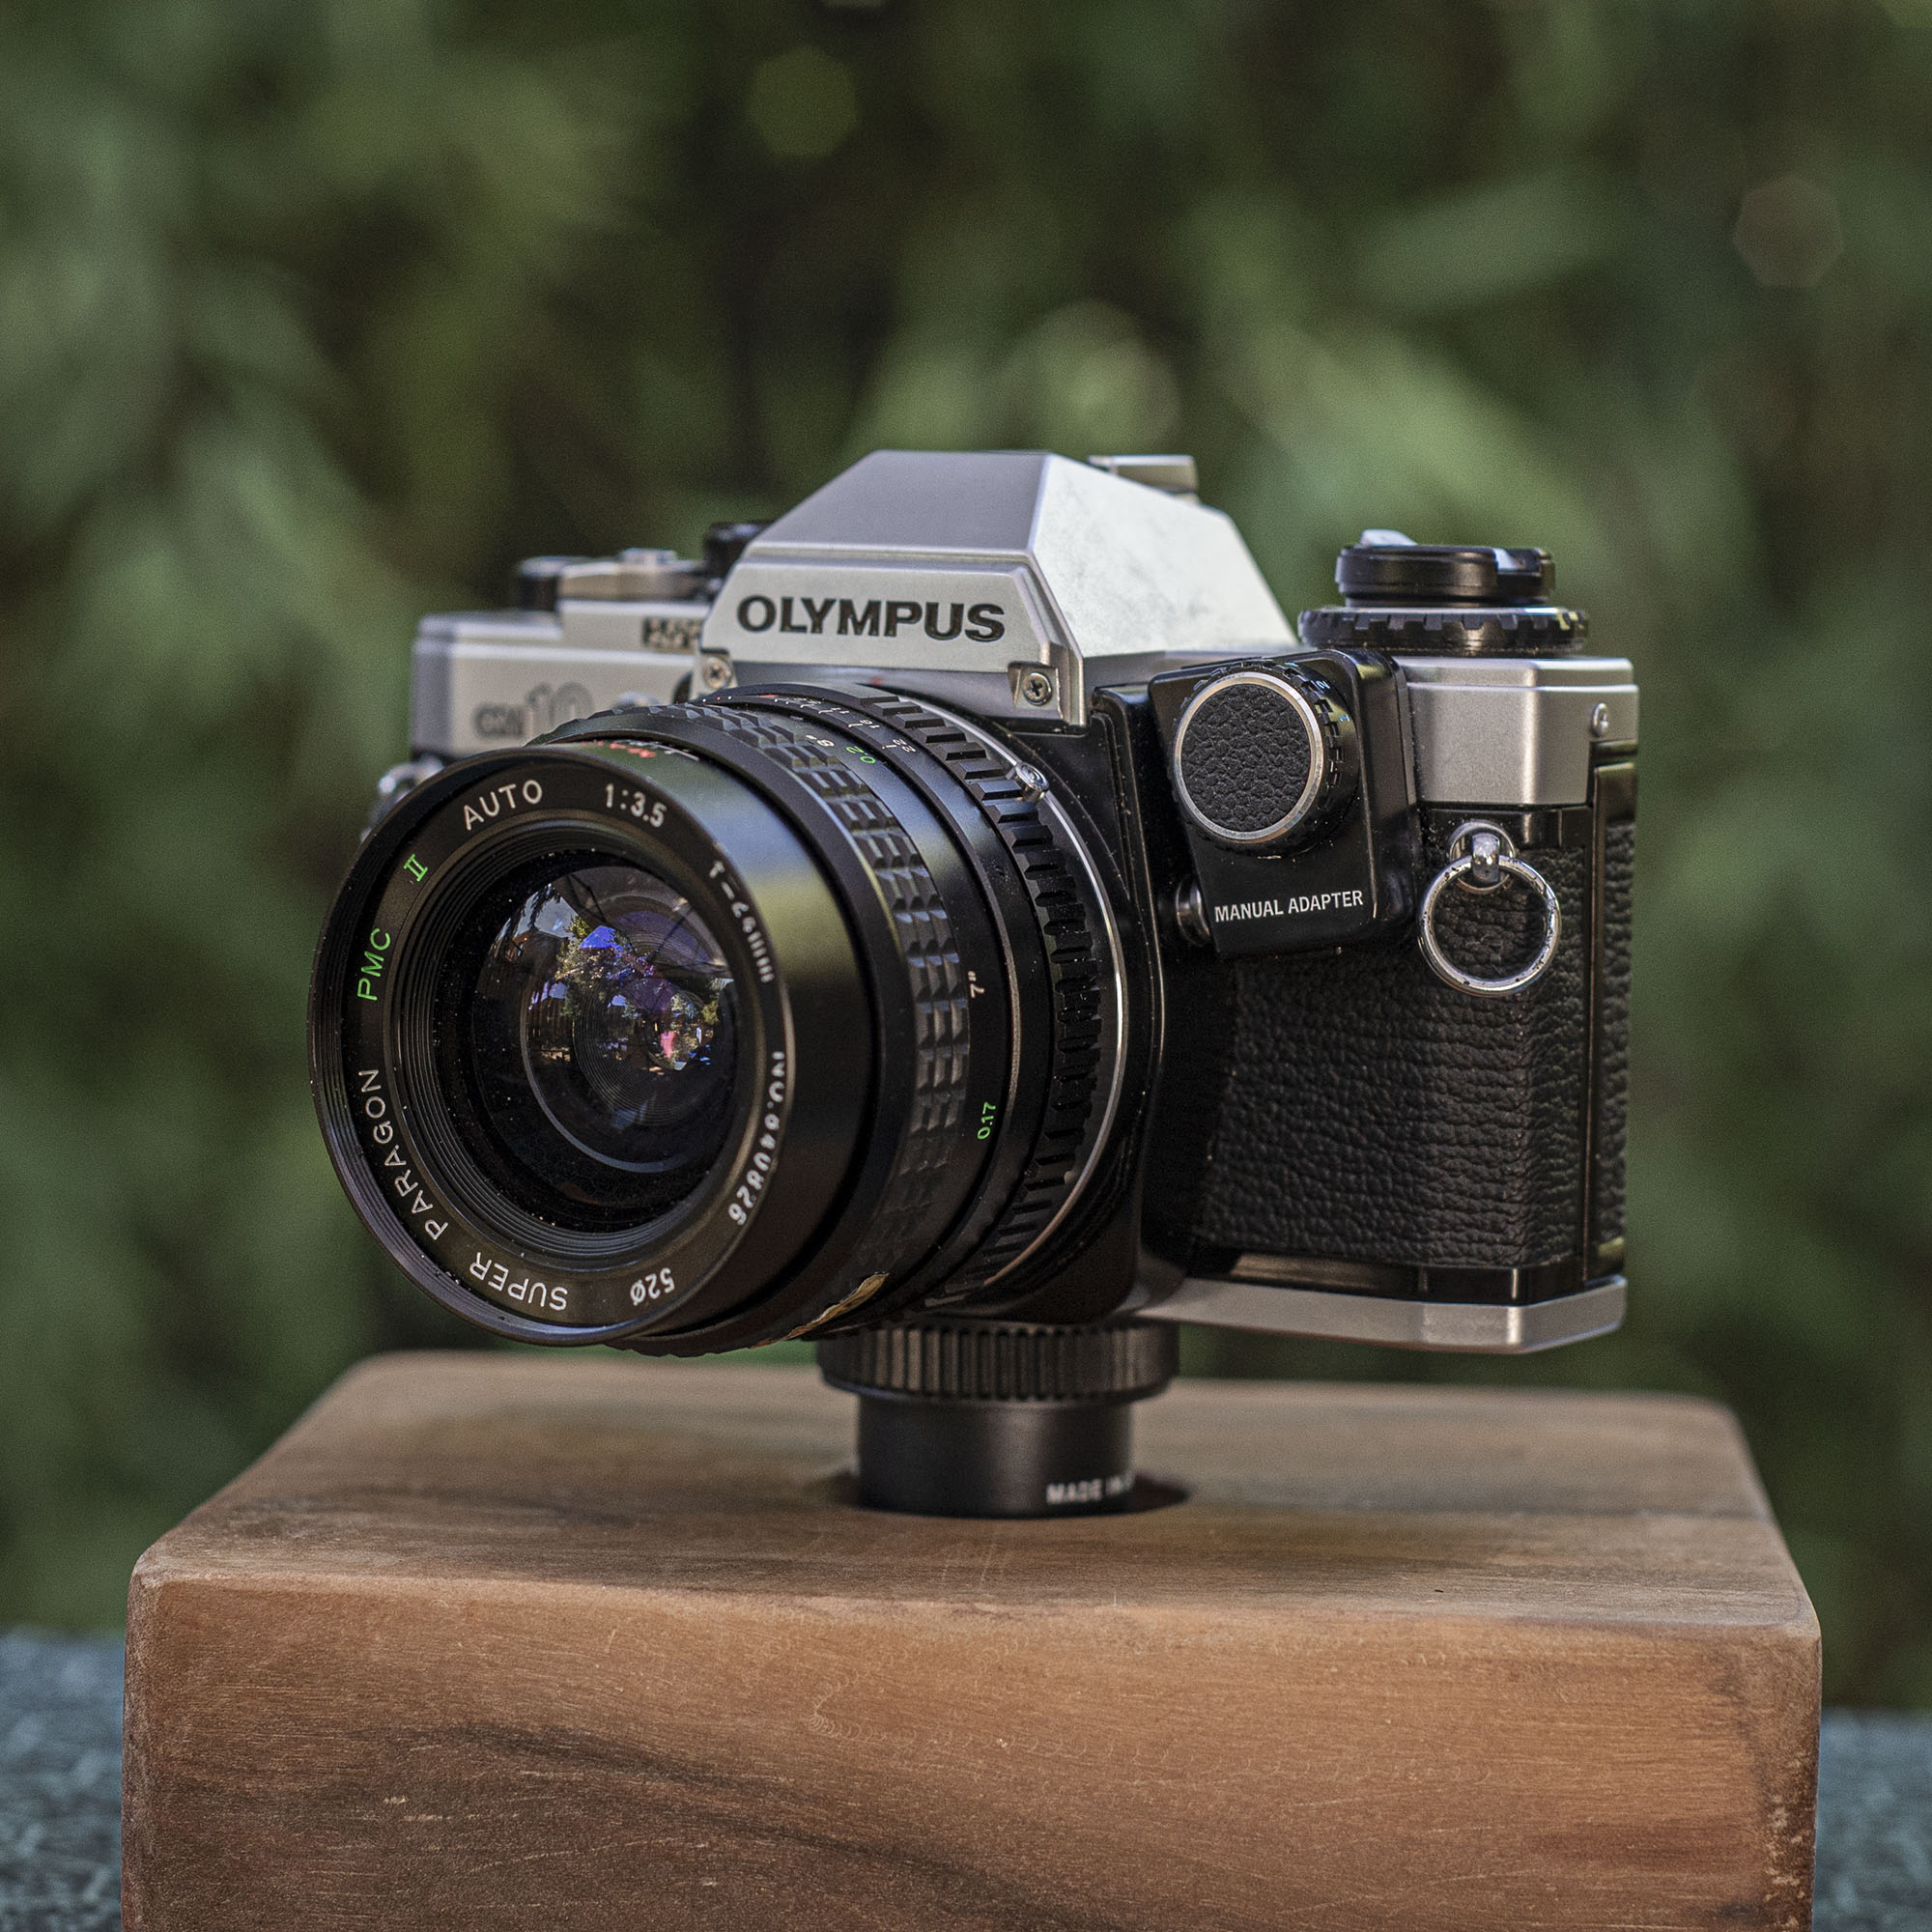 Olympus OM10 : A compact entry level camera — Flogging English